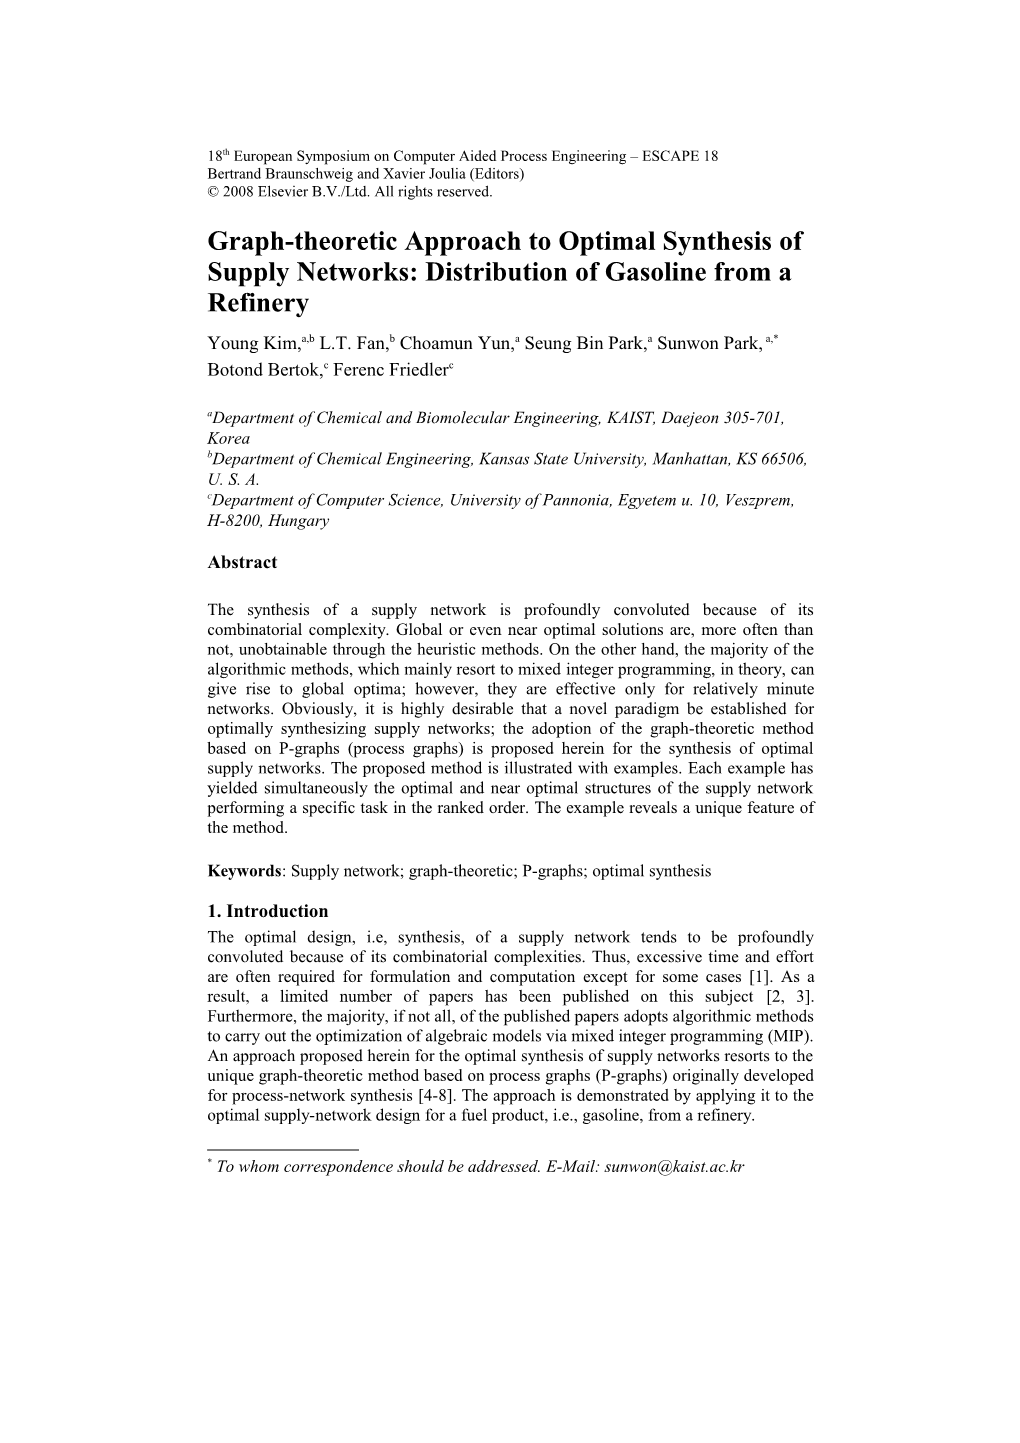 Graph-Theoretic Approach to Optimal Synthesis of Supply Networks 1